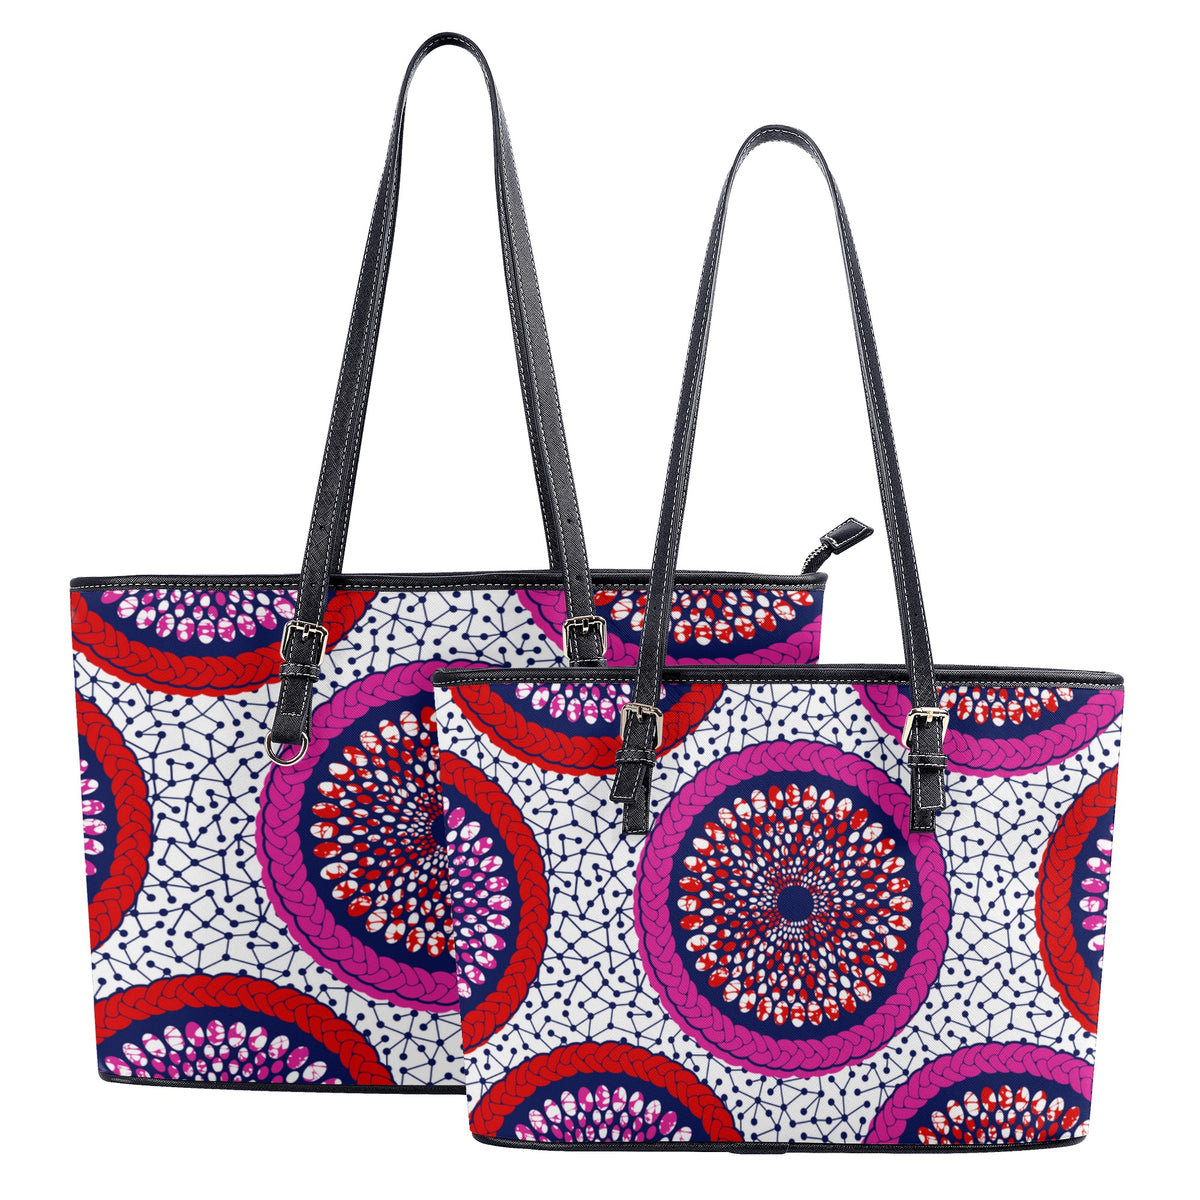 Leather Tote Bags in Ankara Prints Popcustoms